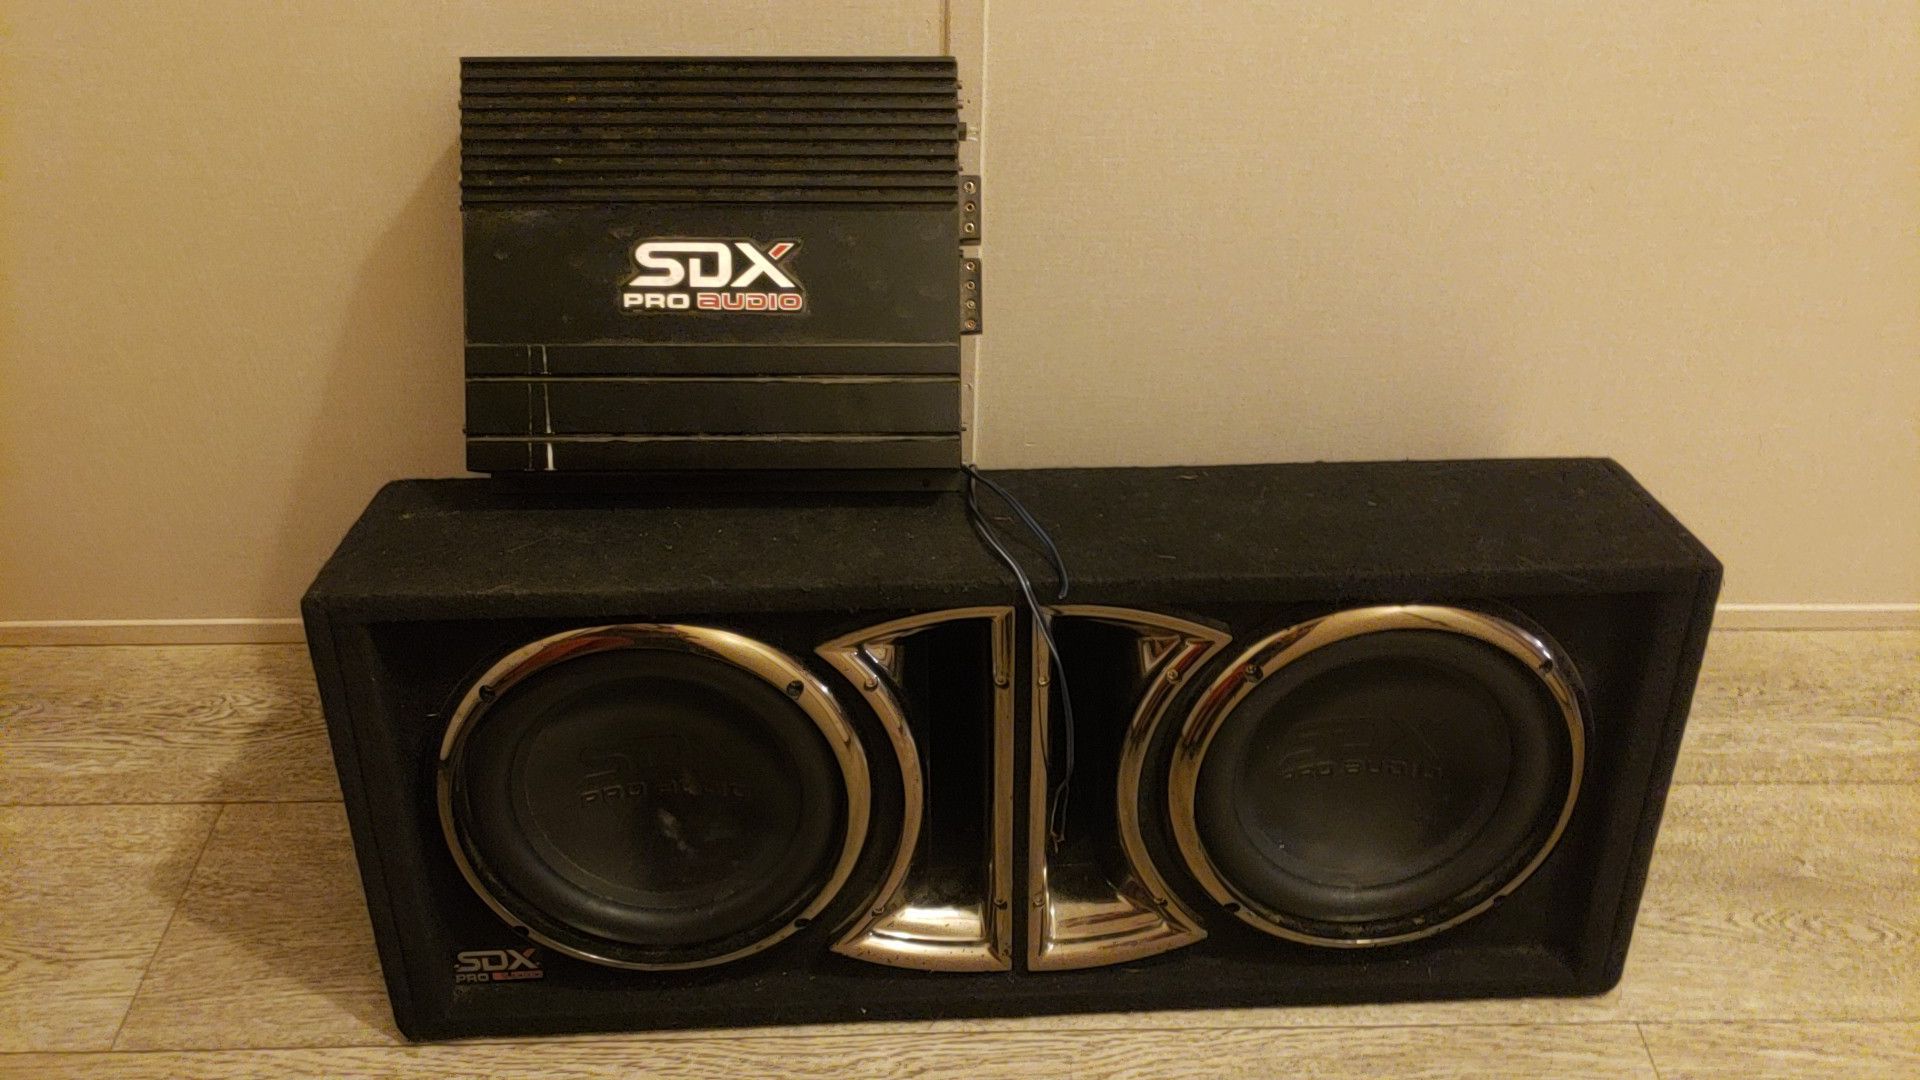 Sdx pro audio 10" sub and 2 channel amp